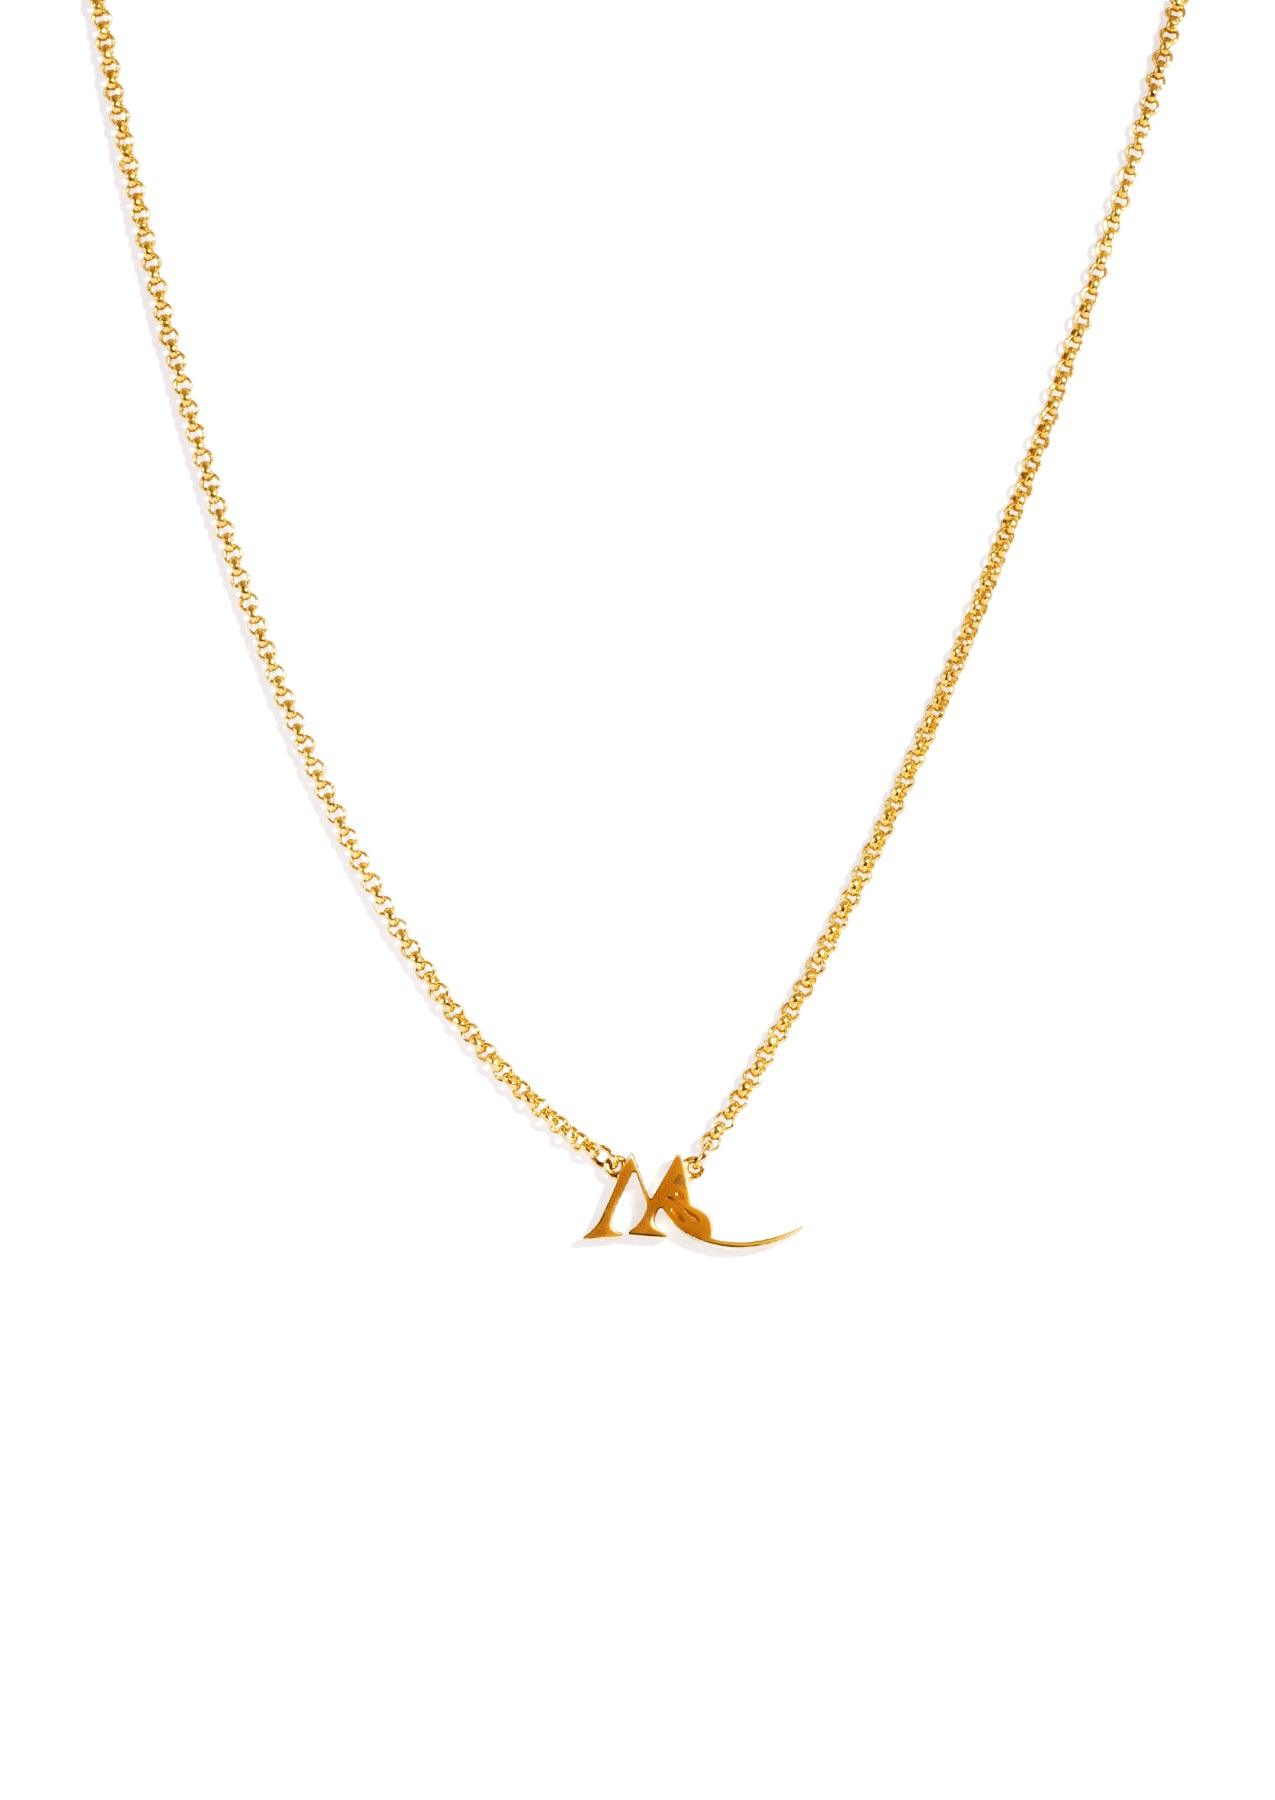 The Solid Gold Whisp Insignia Necklace